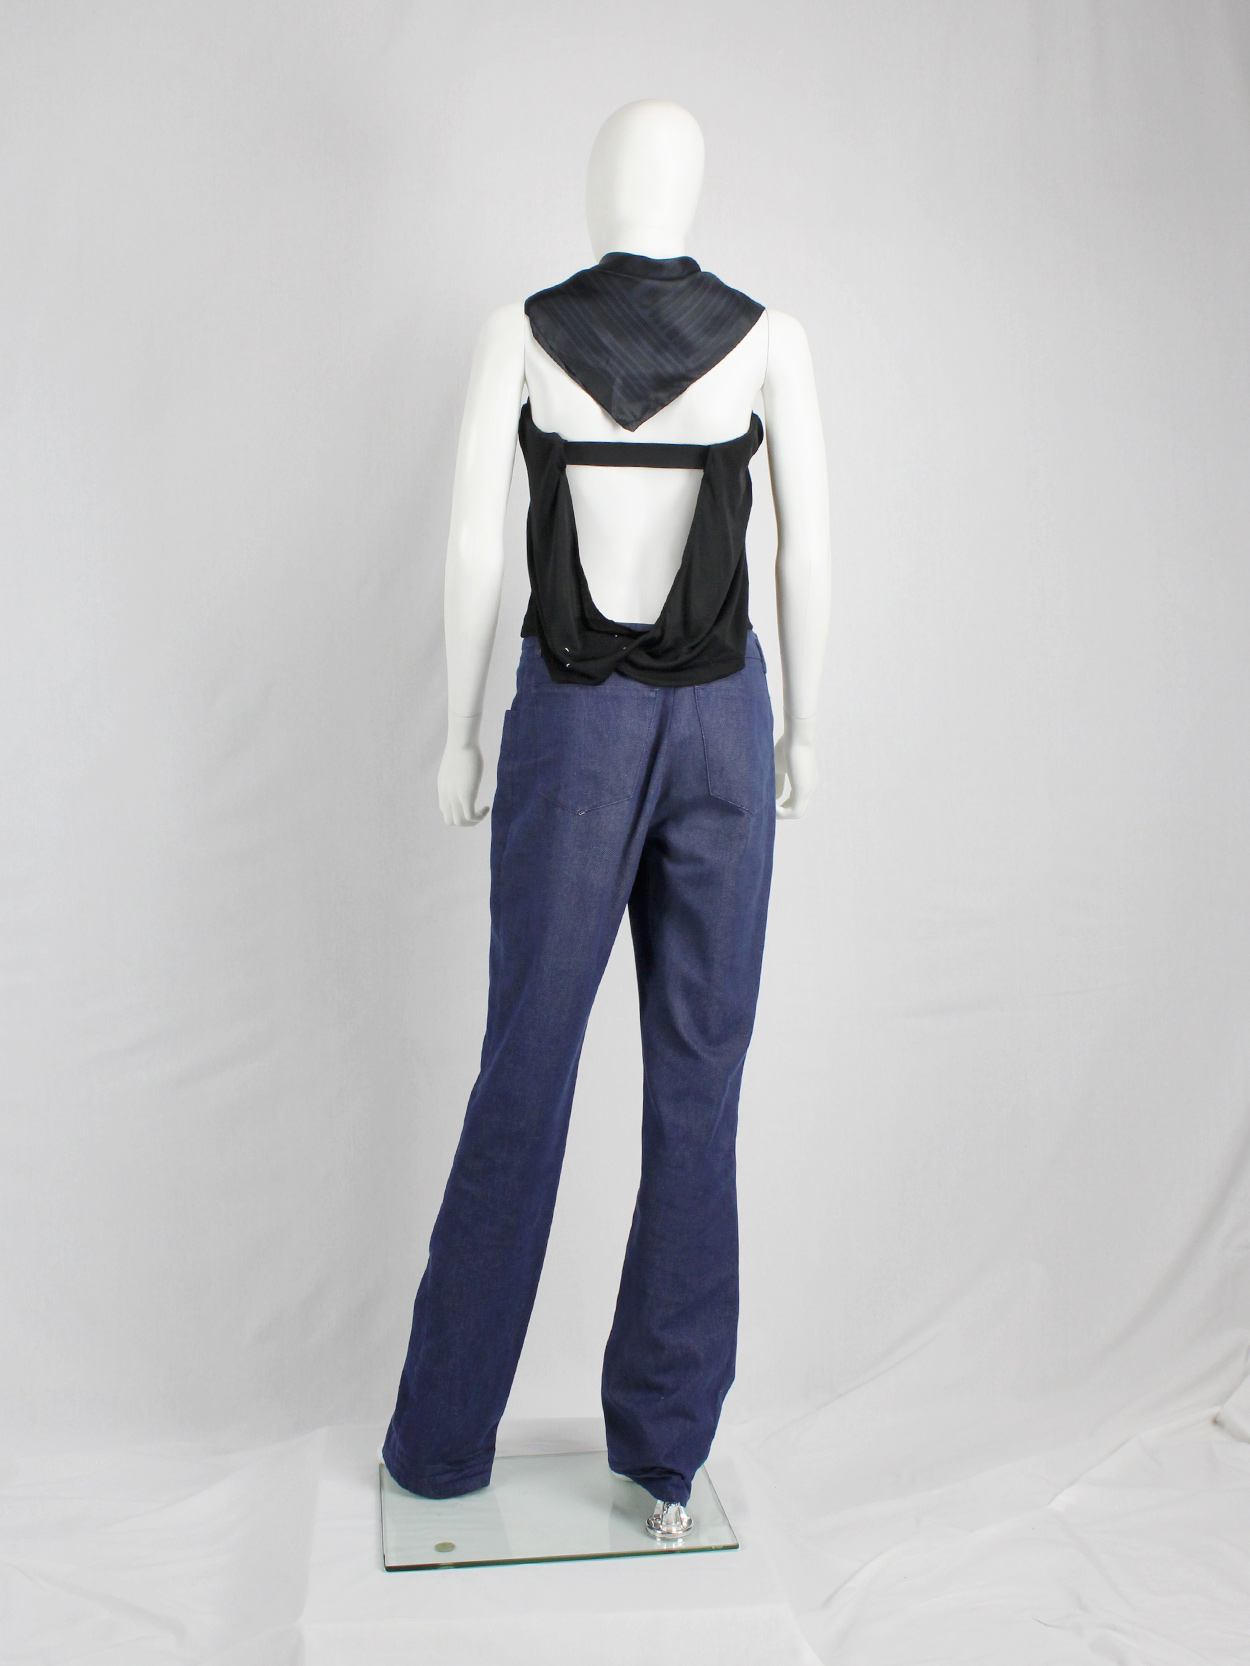 Maison Martin Margiela black backless top with blue scarf collar spring 2007 (10)